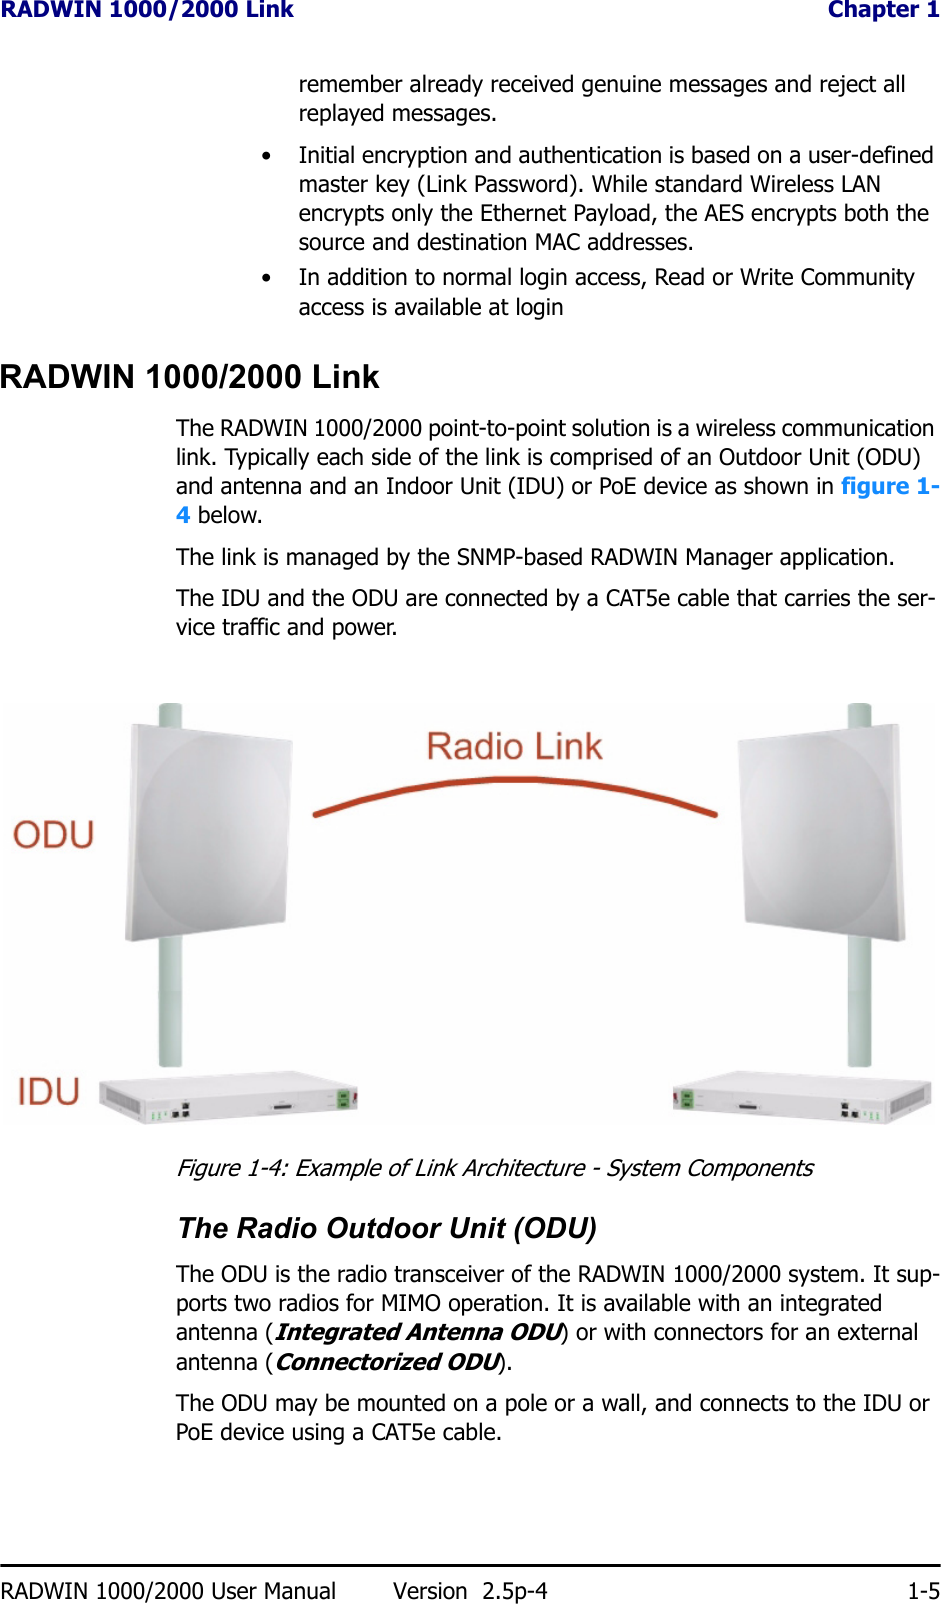 RADWIN 1000/2000 Link  Chapter 1RADWIN 1000/2000 User Manual Version  2.5p-4 1-5remember already received genuine messages and reject all replayed messages.• Initial encryption and authentication is based on a user-defined master key (Link Password). While standard Wireless LAN encrypts only the Ethernet Payload, the AES encrypts both the source and destination MAC addresses.• In addition to normal login access, Read or Write Community access is available at loginRADWIN 1000/2000 LinkThe RADWIN 1000/2000 point-to-point solution is a wireless communication link. Typically each side of the link is comprised of an Outdoor Unit (ODU) and antenna and an Indoor Unit (IDU) or PoE device as shown in figure 1-4 below.The link is managed by the SNMP-based RADWIN Manager application.The IDU and the ODU are connected by a CAT5e cable that carries the ser-vice traffic and power. Figure 1-4: Example of Link Architecture - System ComponentsThe Radio Outdoor Unit (ODU)The ODU is the radio transceiver of the RADWIN 1000/2000 system. It sup-ports two radios for MIMO operation. It is available with an integrated antenna (Integrated Antenna ODU) or with connectors for an external antenna (Connectorized ODU).The ODU may be mounted on a pole or a wall, and connects to the IDU or PoE device using a CAT5e cable.